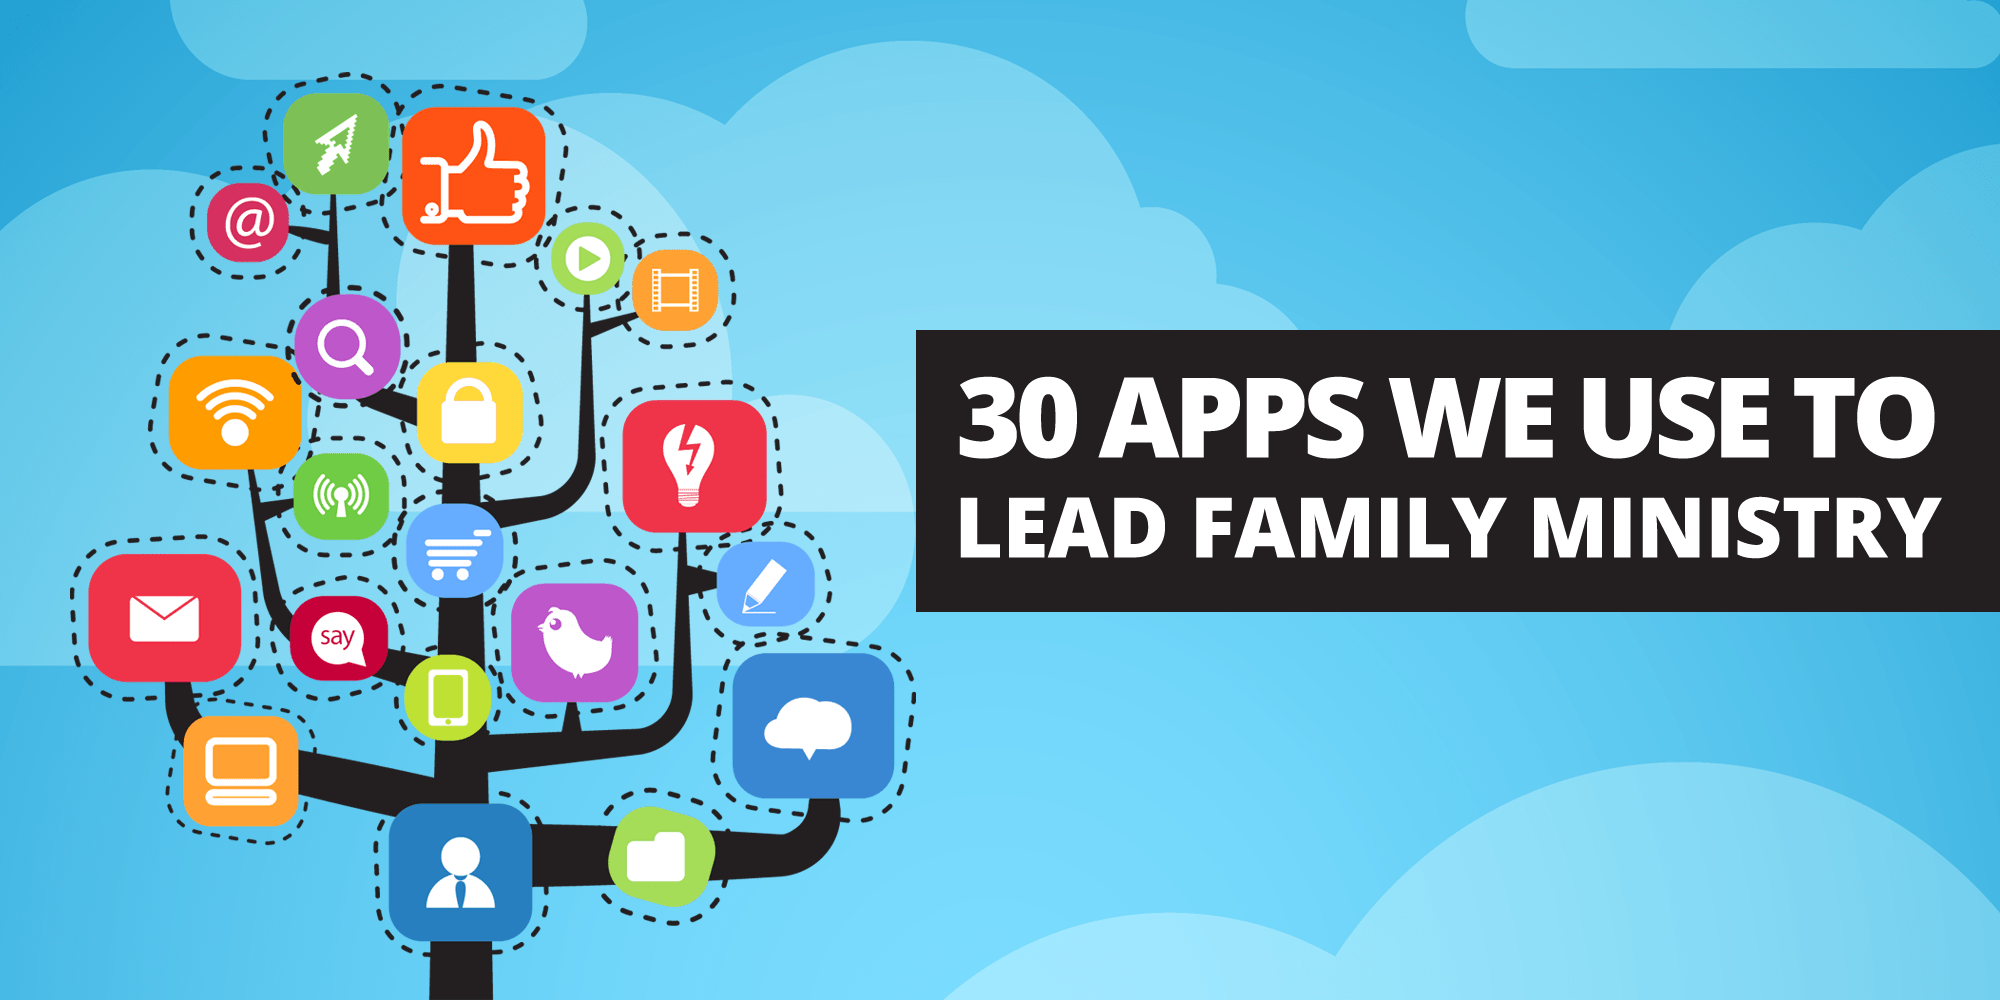 30 Apps We Use to Lead Family Ministry